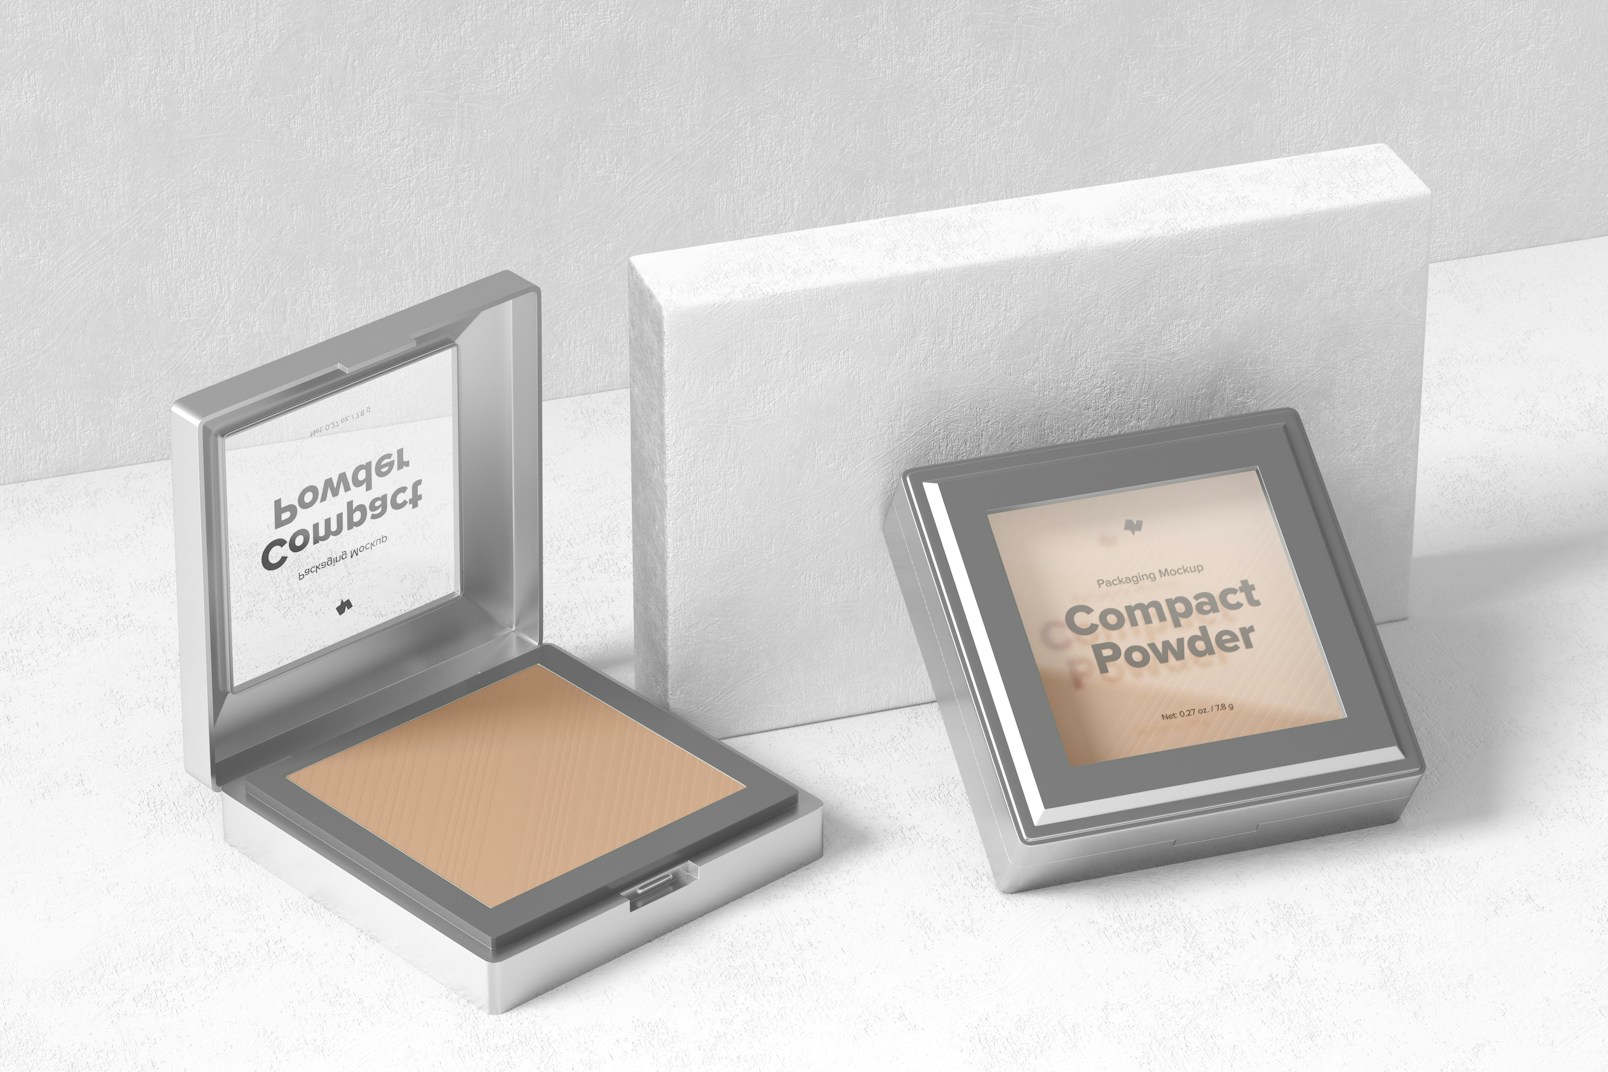 Compact Powder Packaging Mockup, Opened and Closed